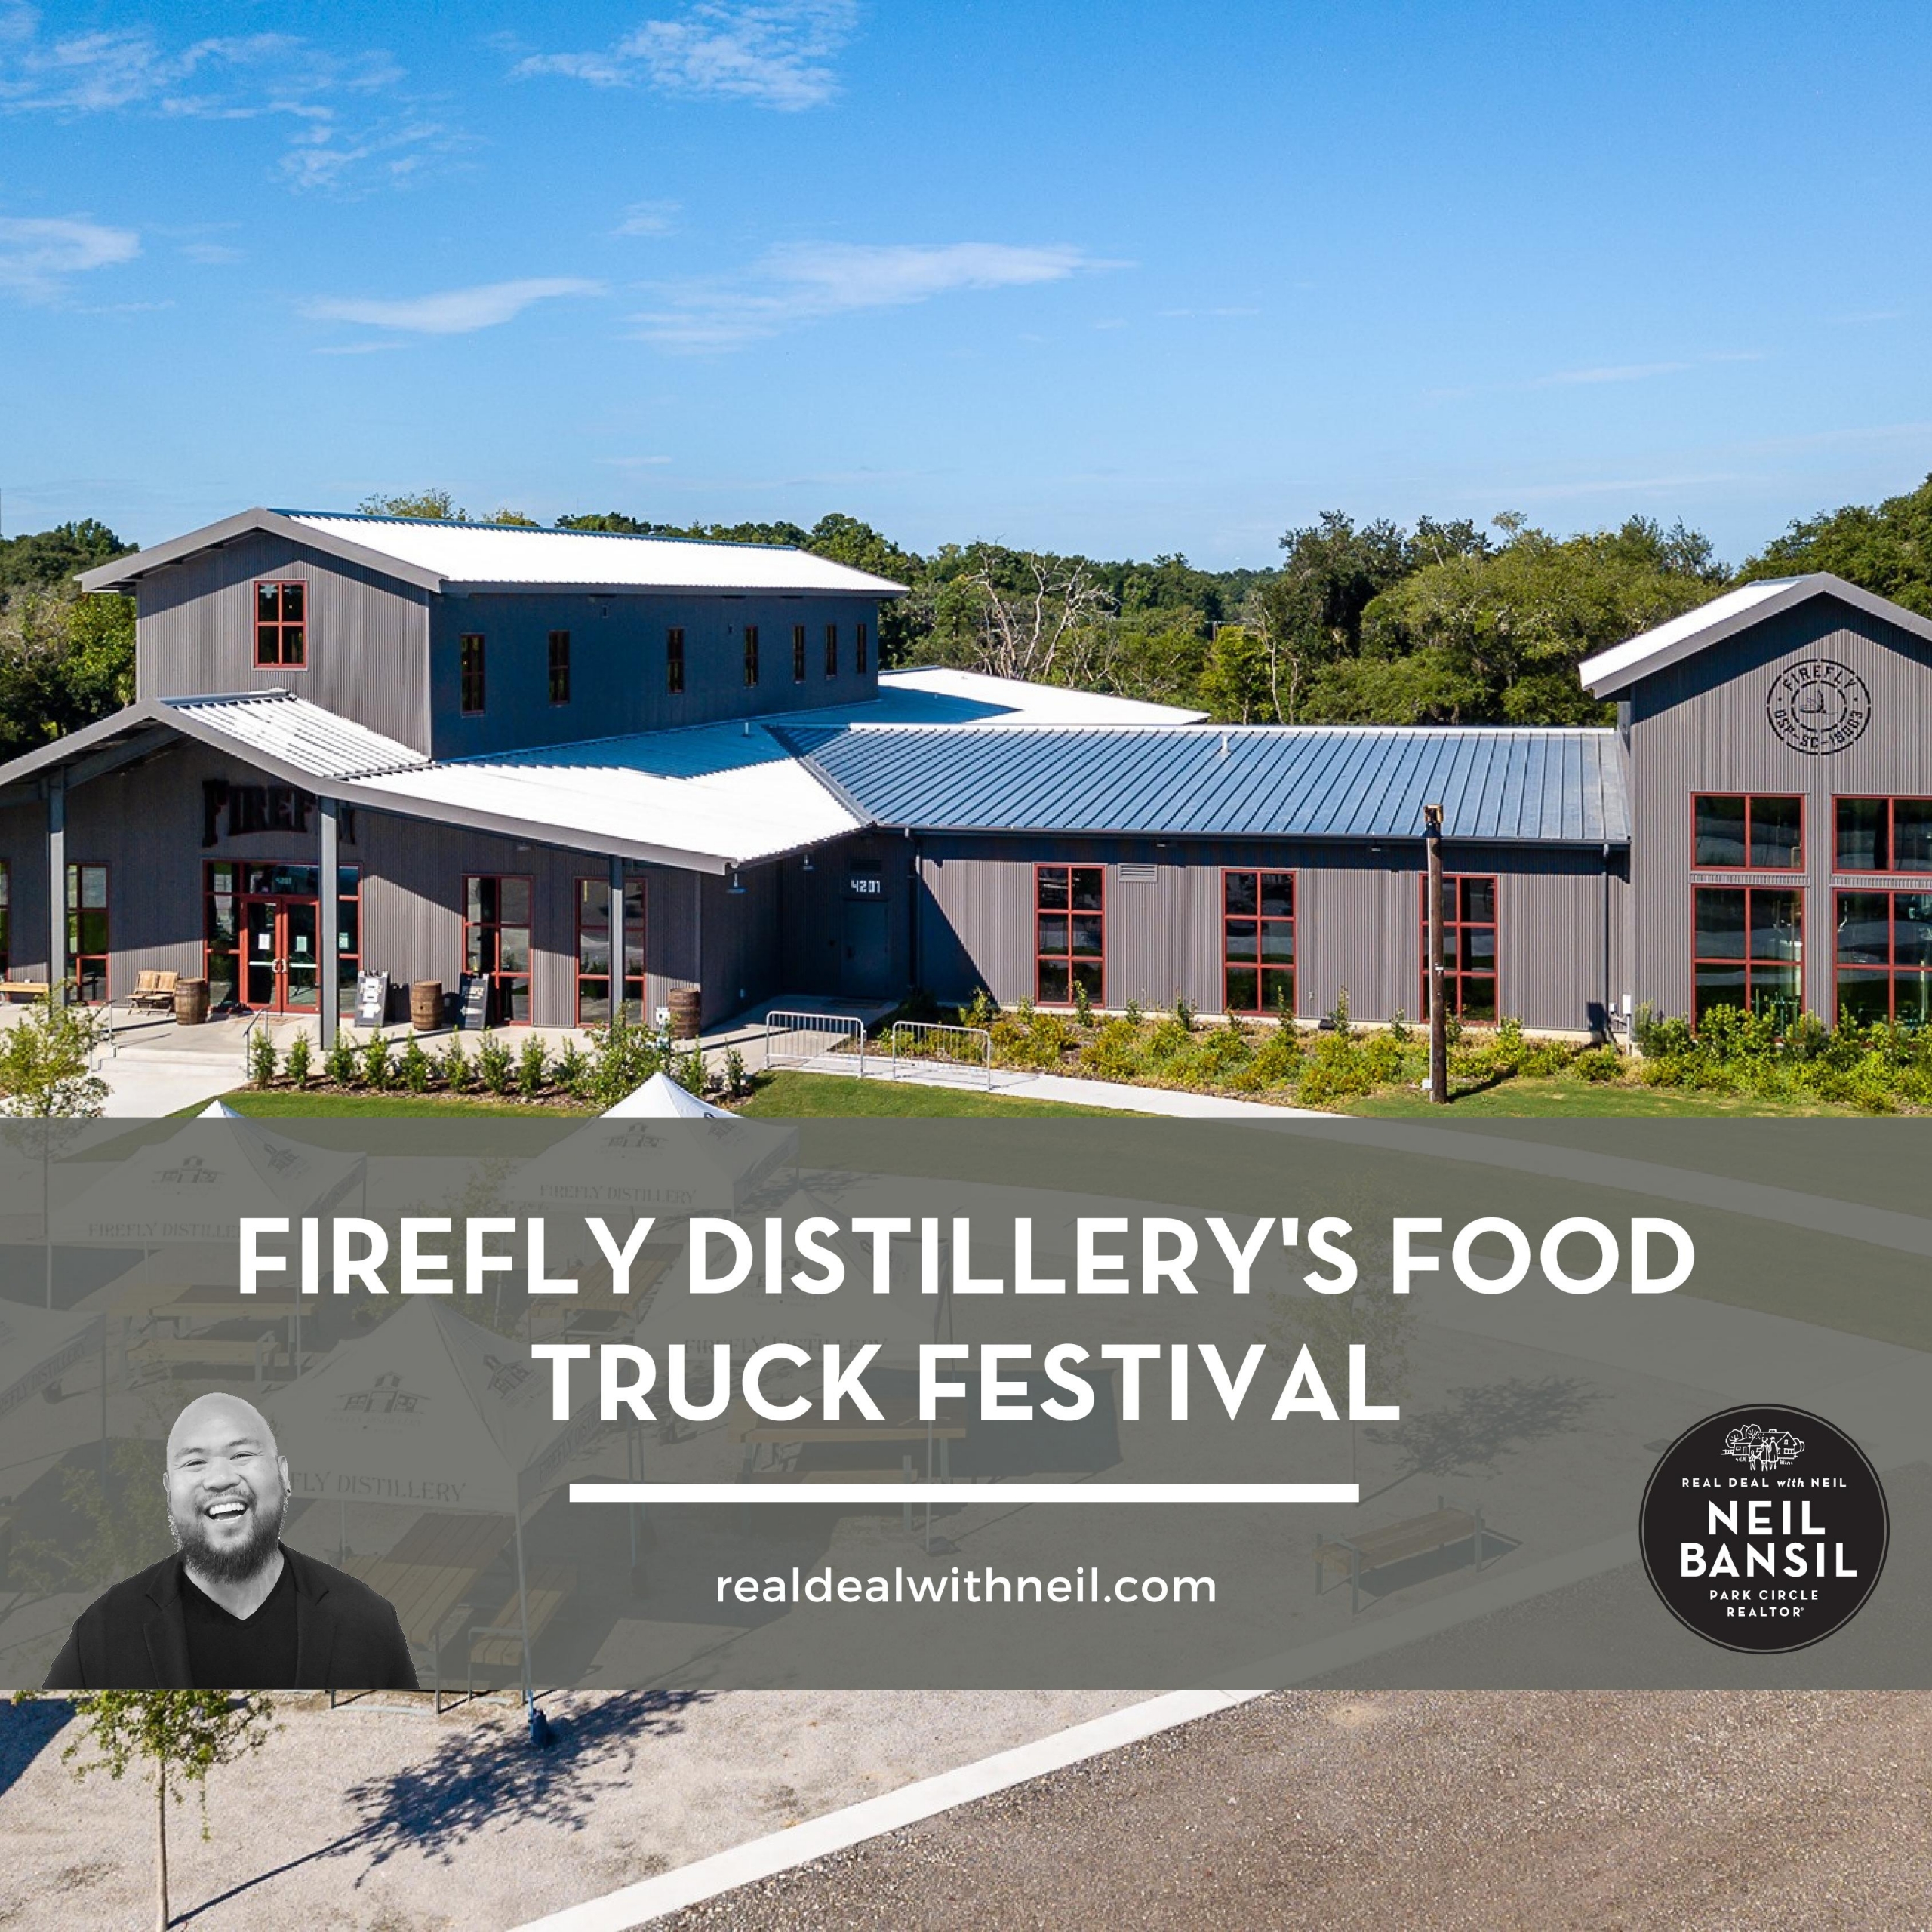 Firefly Distillery's Food Truck Festival - The Real Deal with Neil